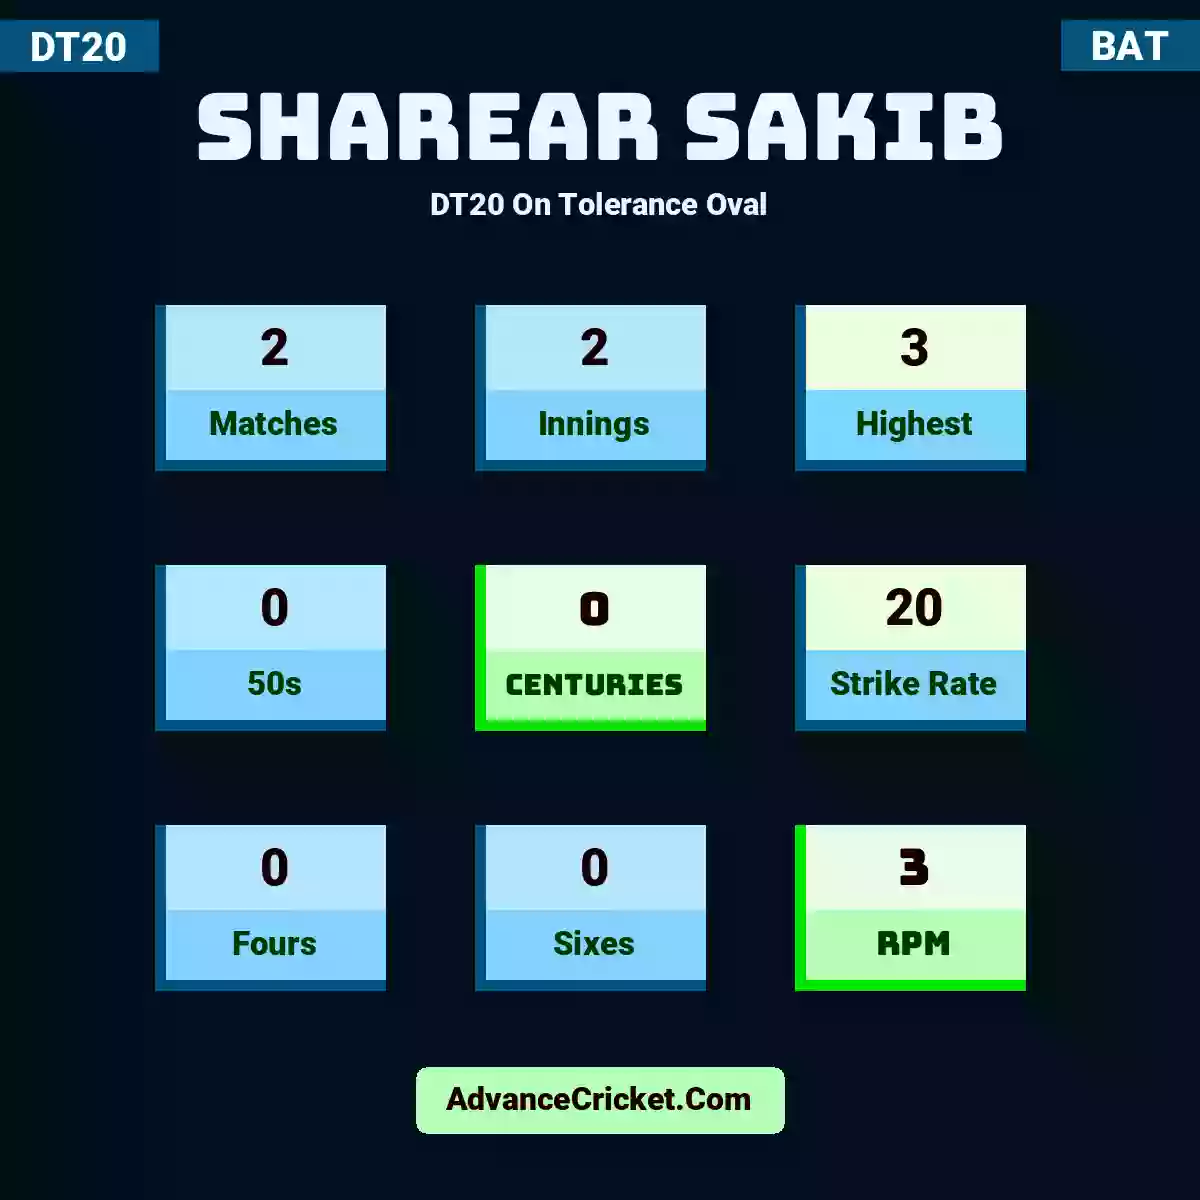 Sharear Sakib DT20  On Tolerance Oval, Sharear Sakib played 2 matches, scored 3 runs as highest, 0 half-centuries, and 0 centuries, with a strike rate of 20. S.Sakib hit 0 fours and 0 sixes, with an RPM of 3.